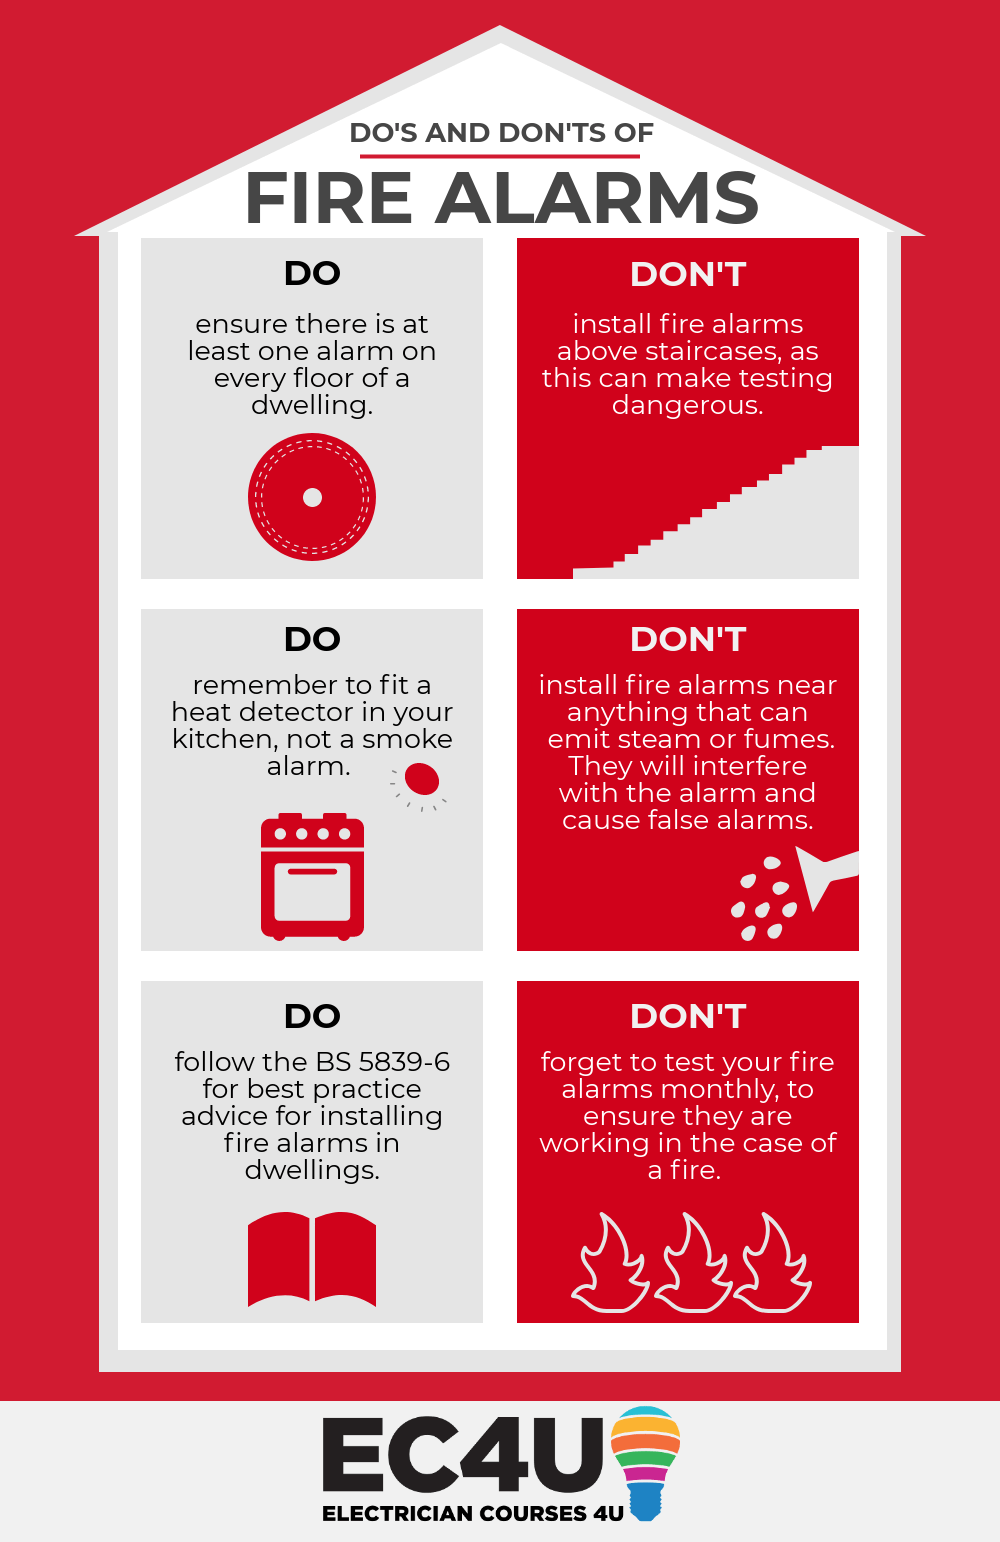 do's and don'ts for fire alarms